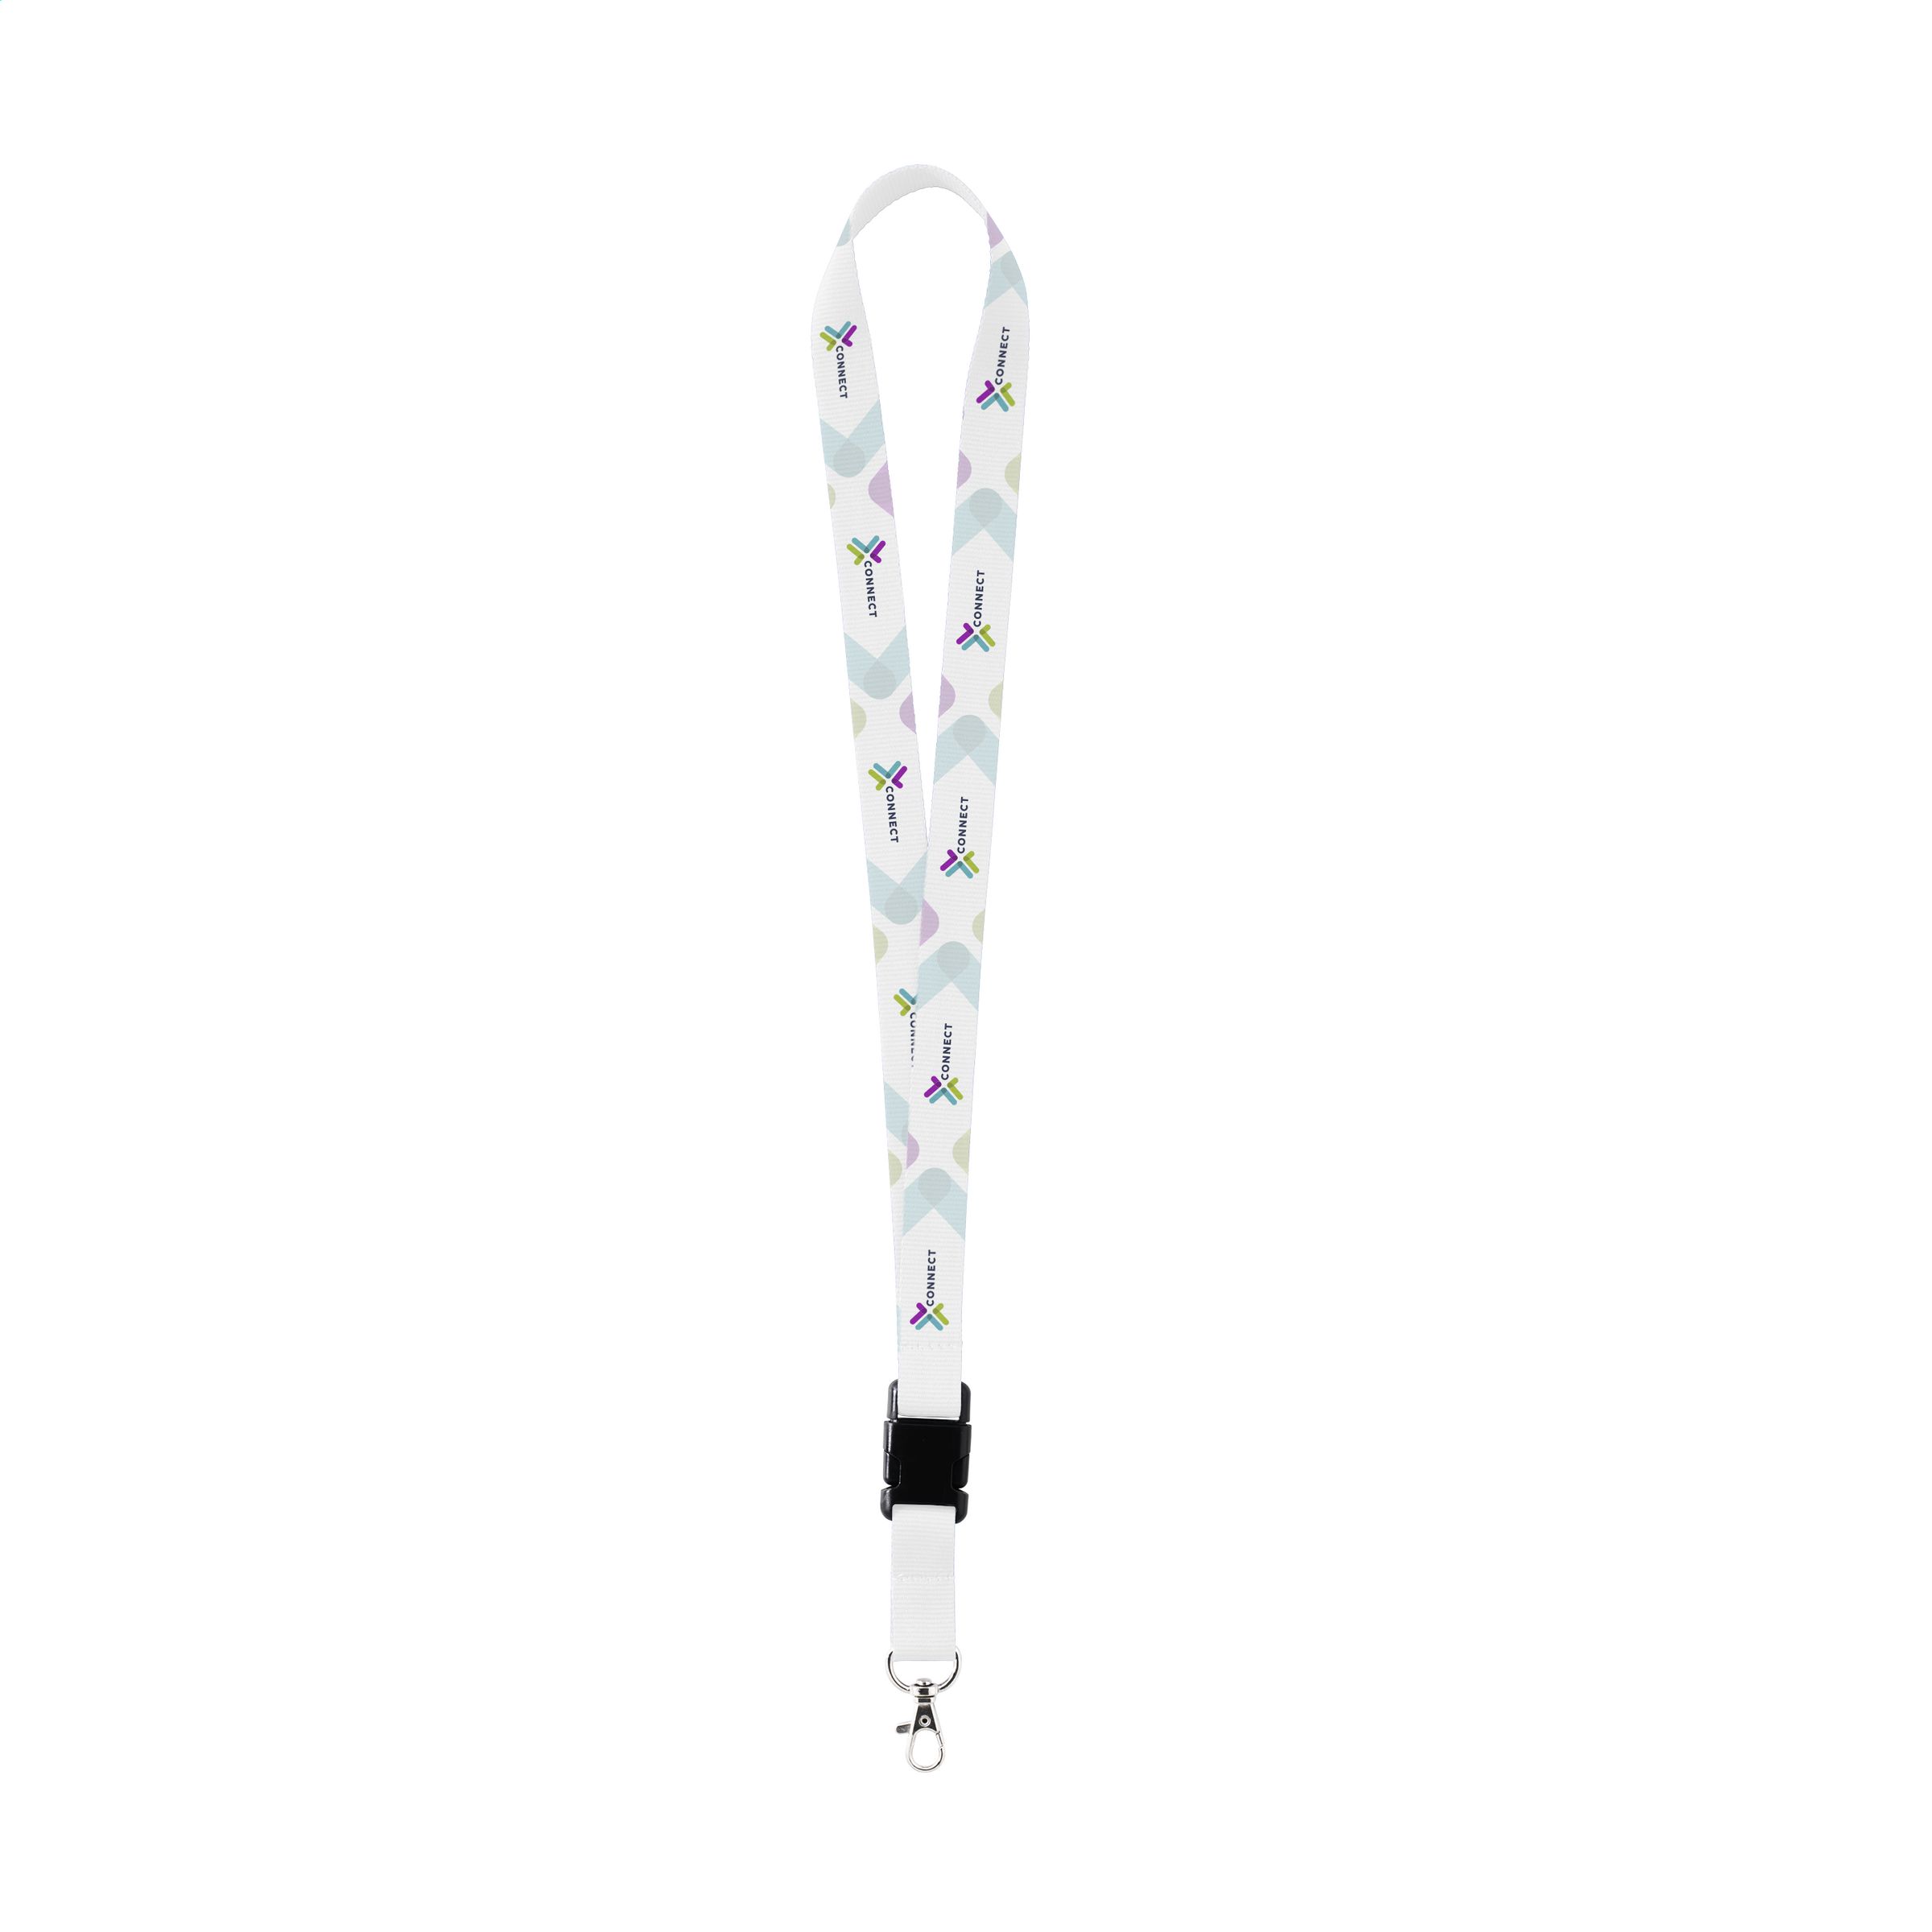 A lanyard, woven from recycled PET bottles, featuring a metal carabiner and a plastic buckle. - West Bromwich